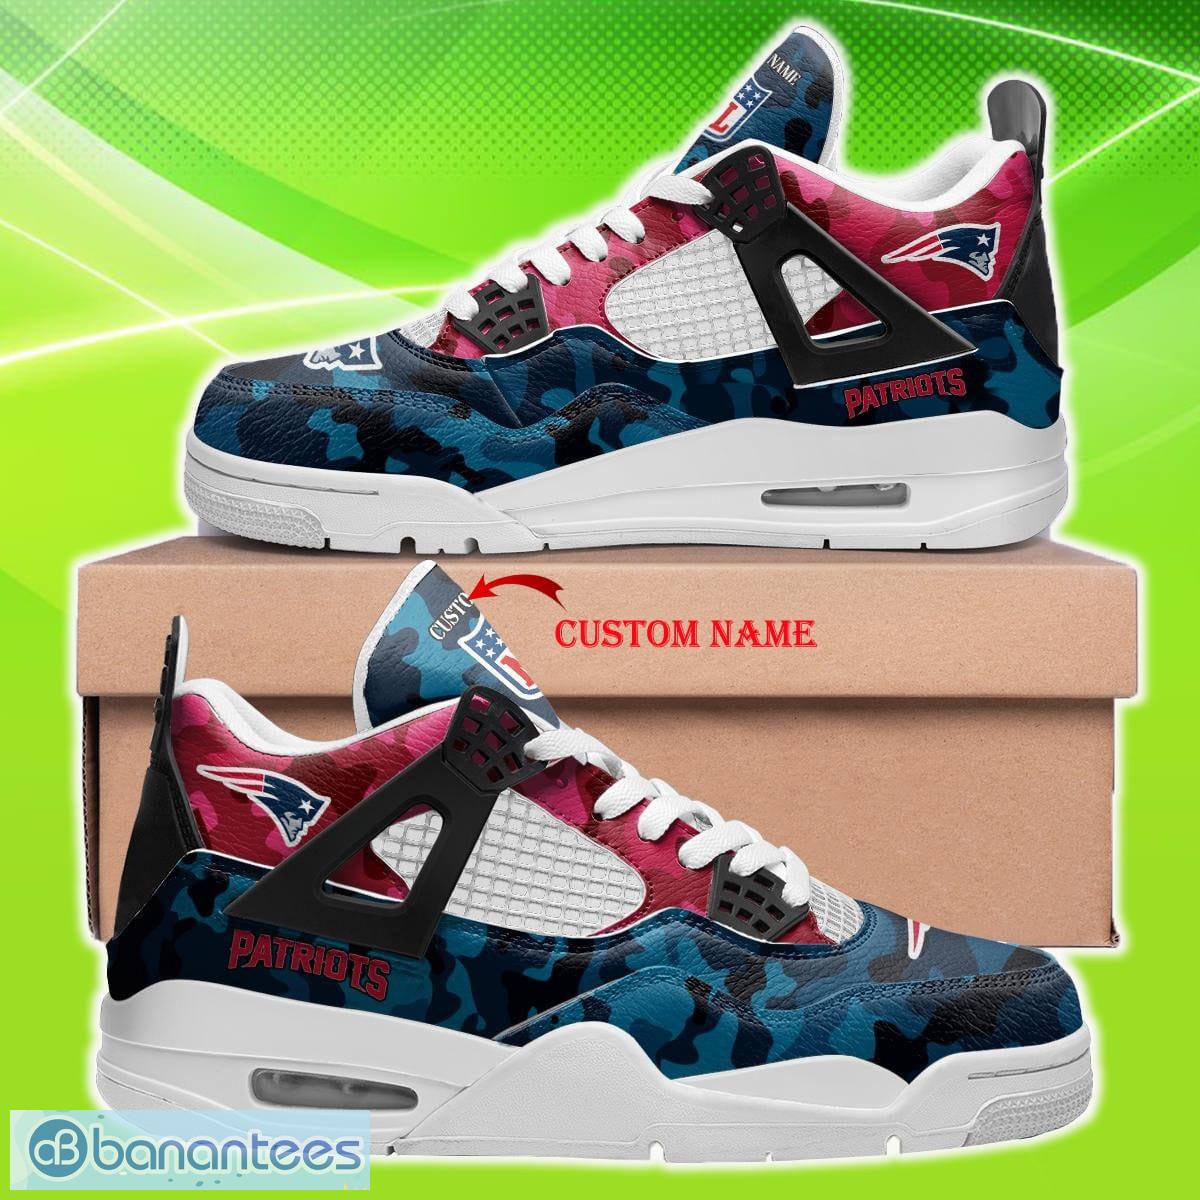 Camo Best England Patriots Custom Name Air Jordan 4 Shoes Camo Best For Men And Women Gift Fans - New England Patriots Personalized Jordan 4 Fabric Sneaker - Custom Name Sneaker Men & Women - NFL Lovers, Birthday's Gift, Gift For NFL Fan_1